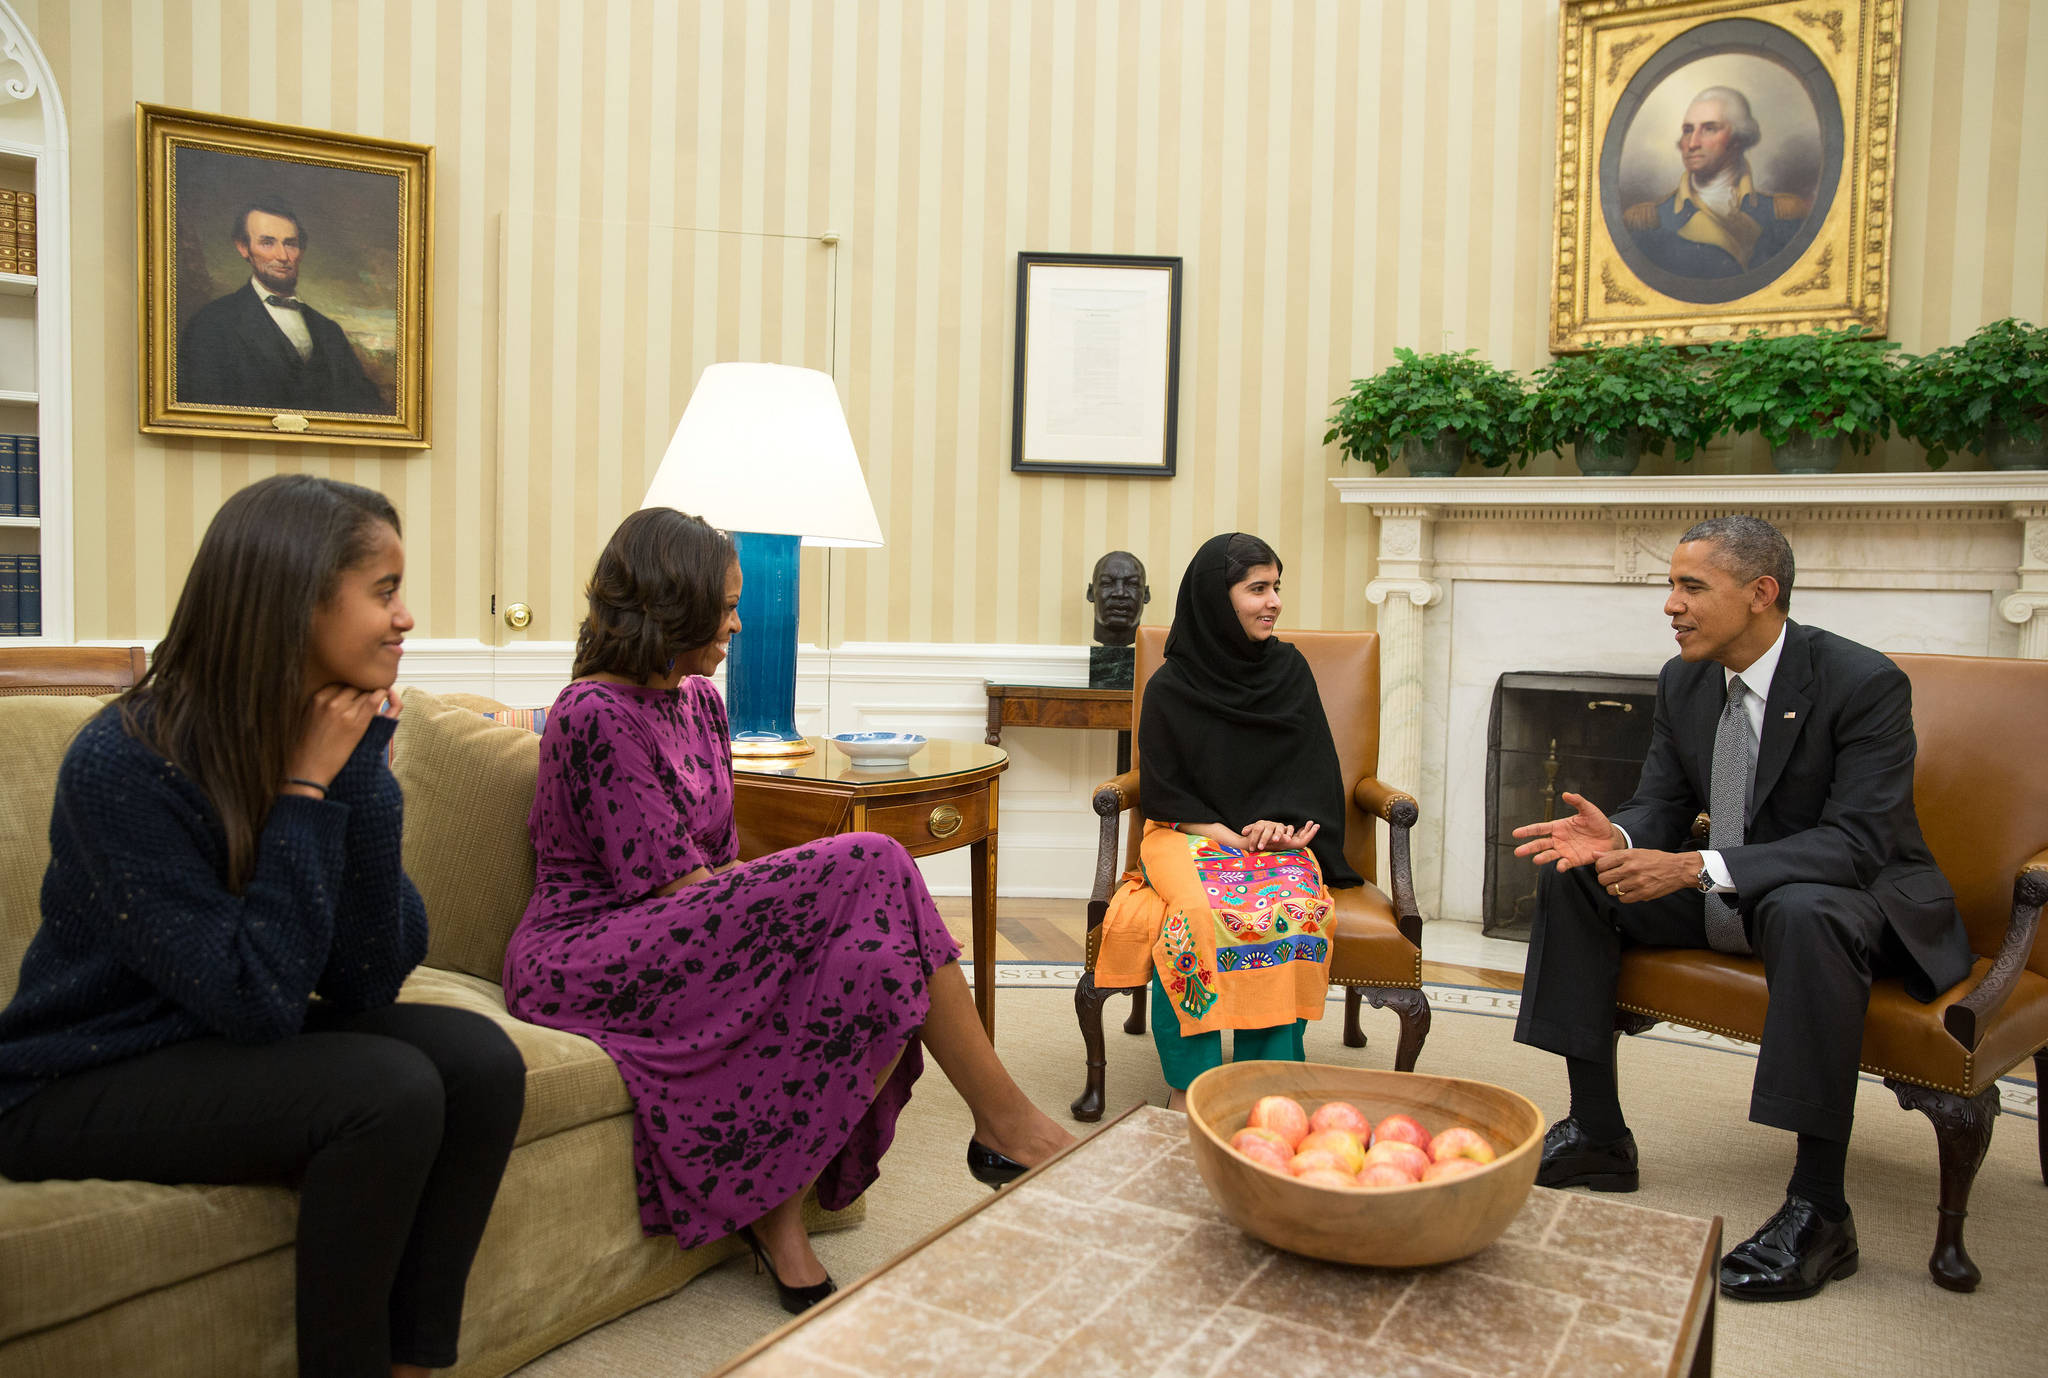 Pete Souza, official White House photo.                                President Barack Obama, First Lady Michelle Obama, and their daughter Malia meet with Malala Yousafzai, the young Pakistani schoolgirl who was shot in the head by the Taliban, in the Oval Office, Oct. 11, 2013.